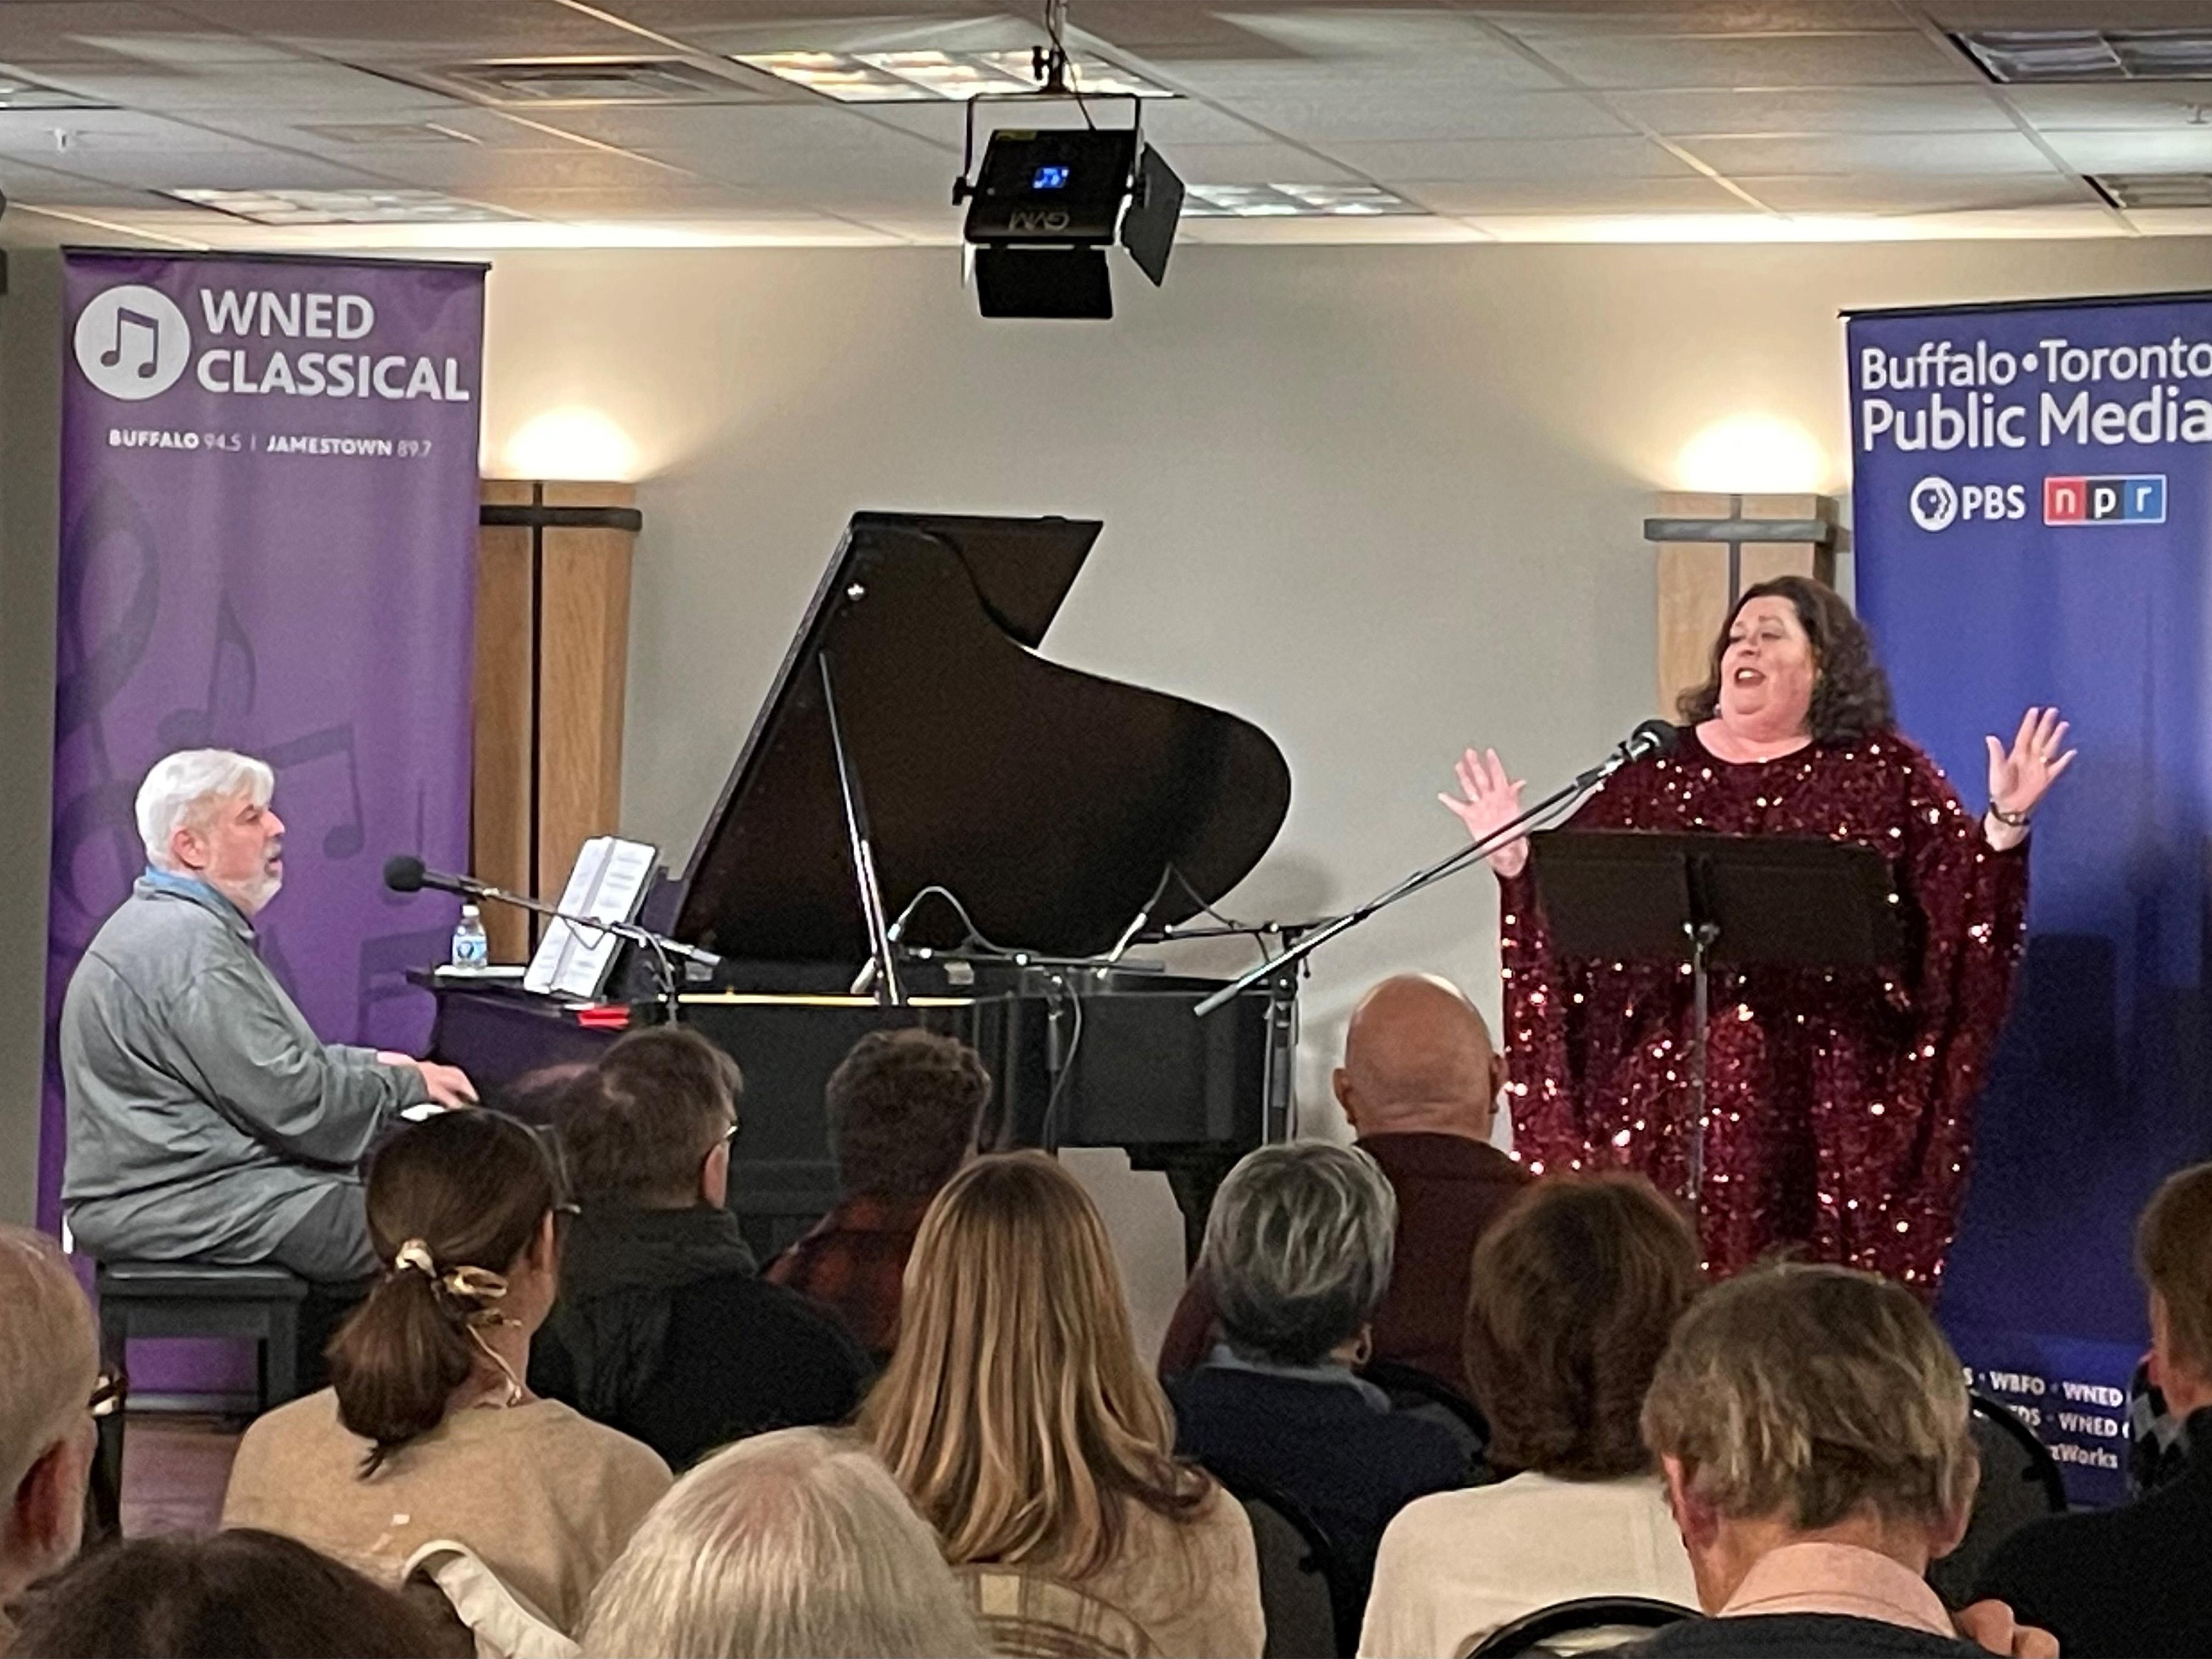 a man playing the piano and a woman singing onstage in the WNED Classical Performance space